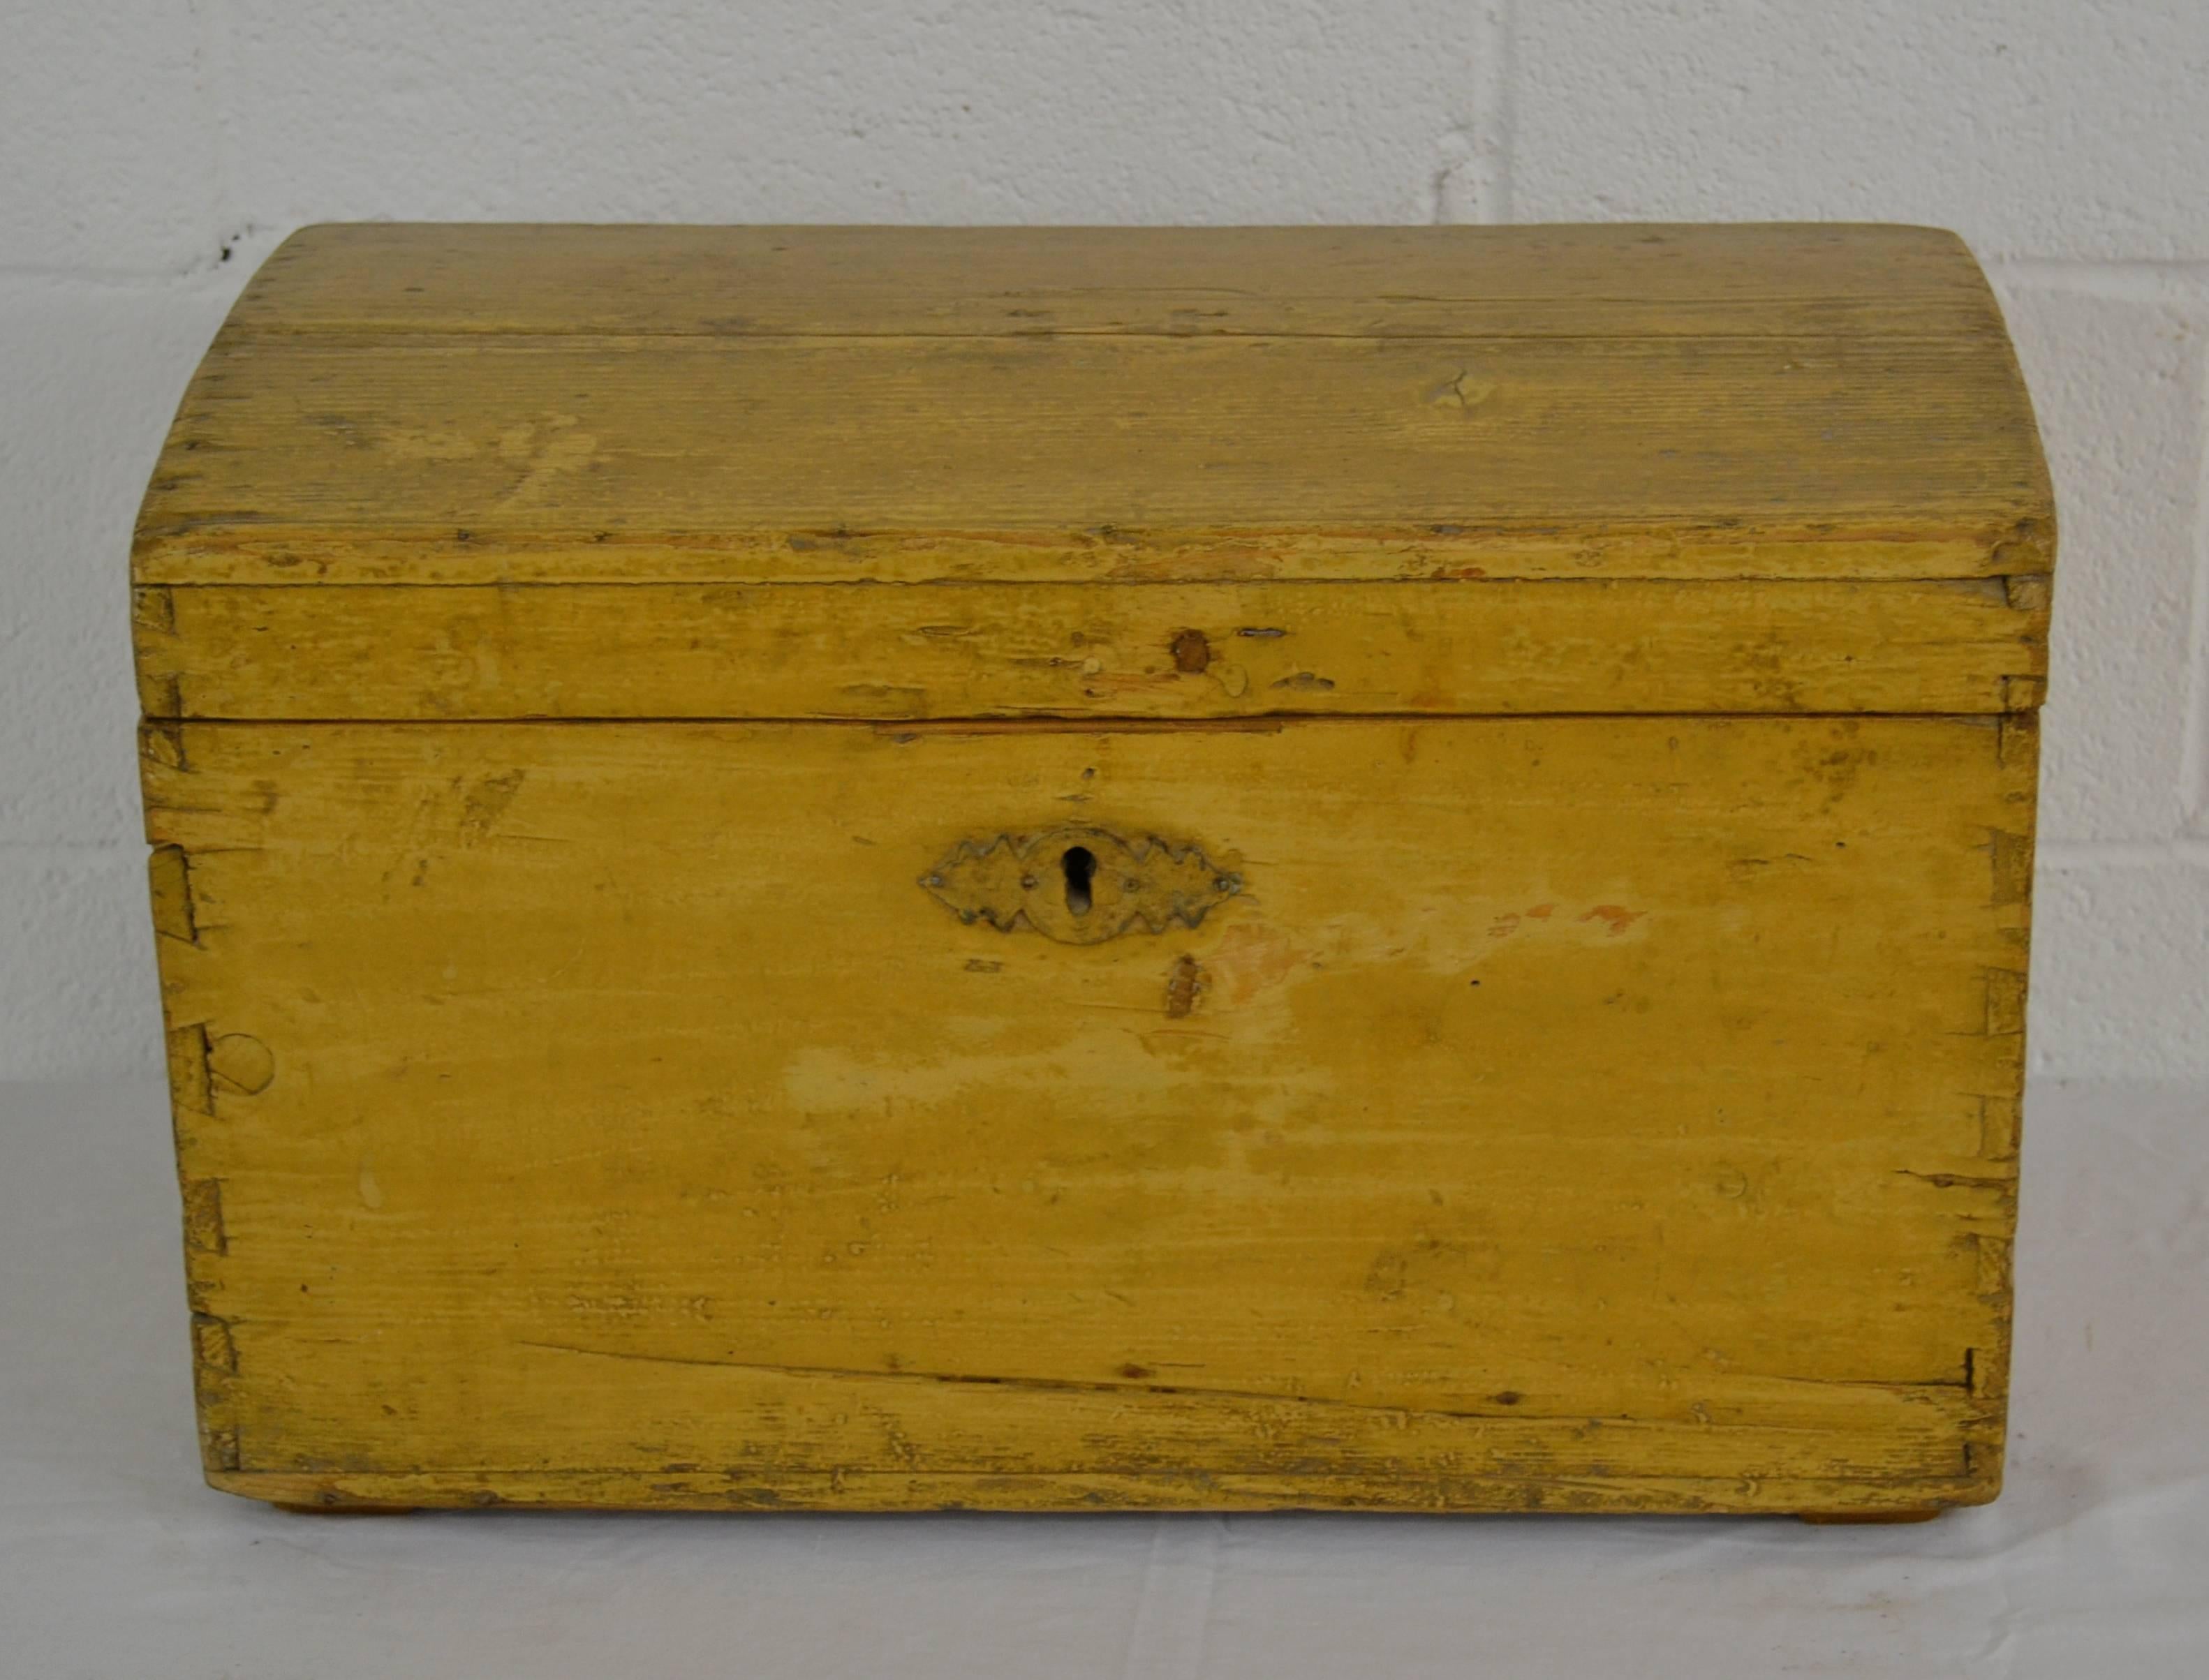 A vintage pine dovetailed army box with a stamped zinc escutcheon plate and slight dome to the top. In old worn yellow and mustard paint.